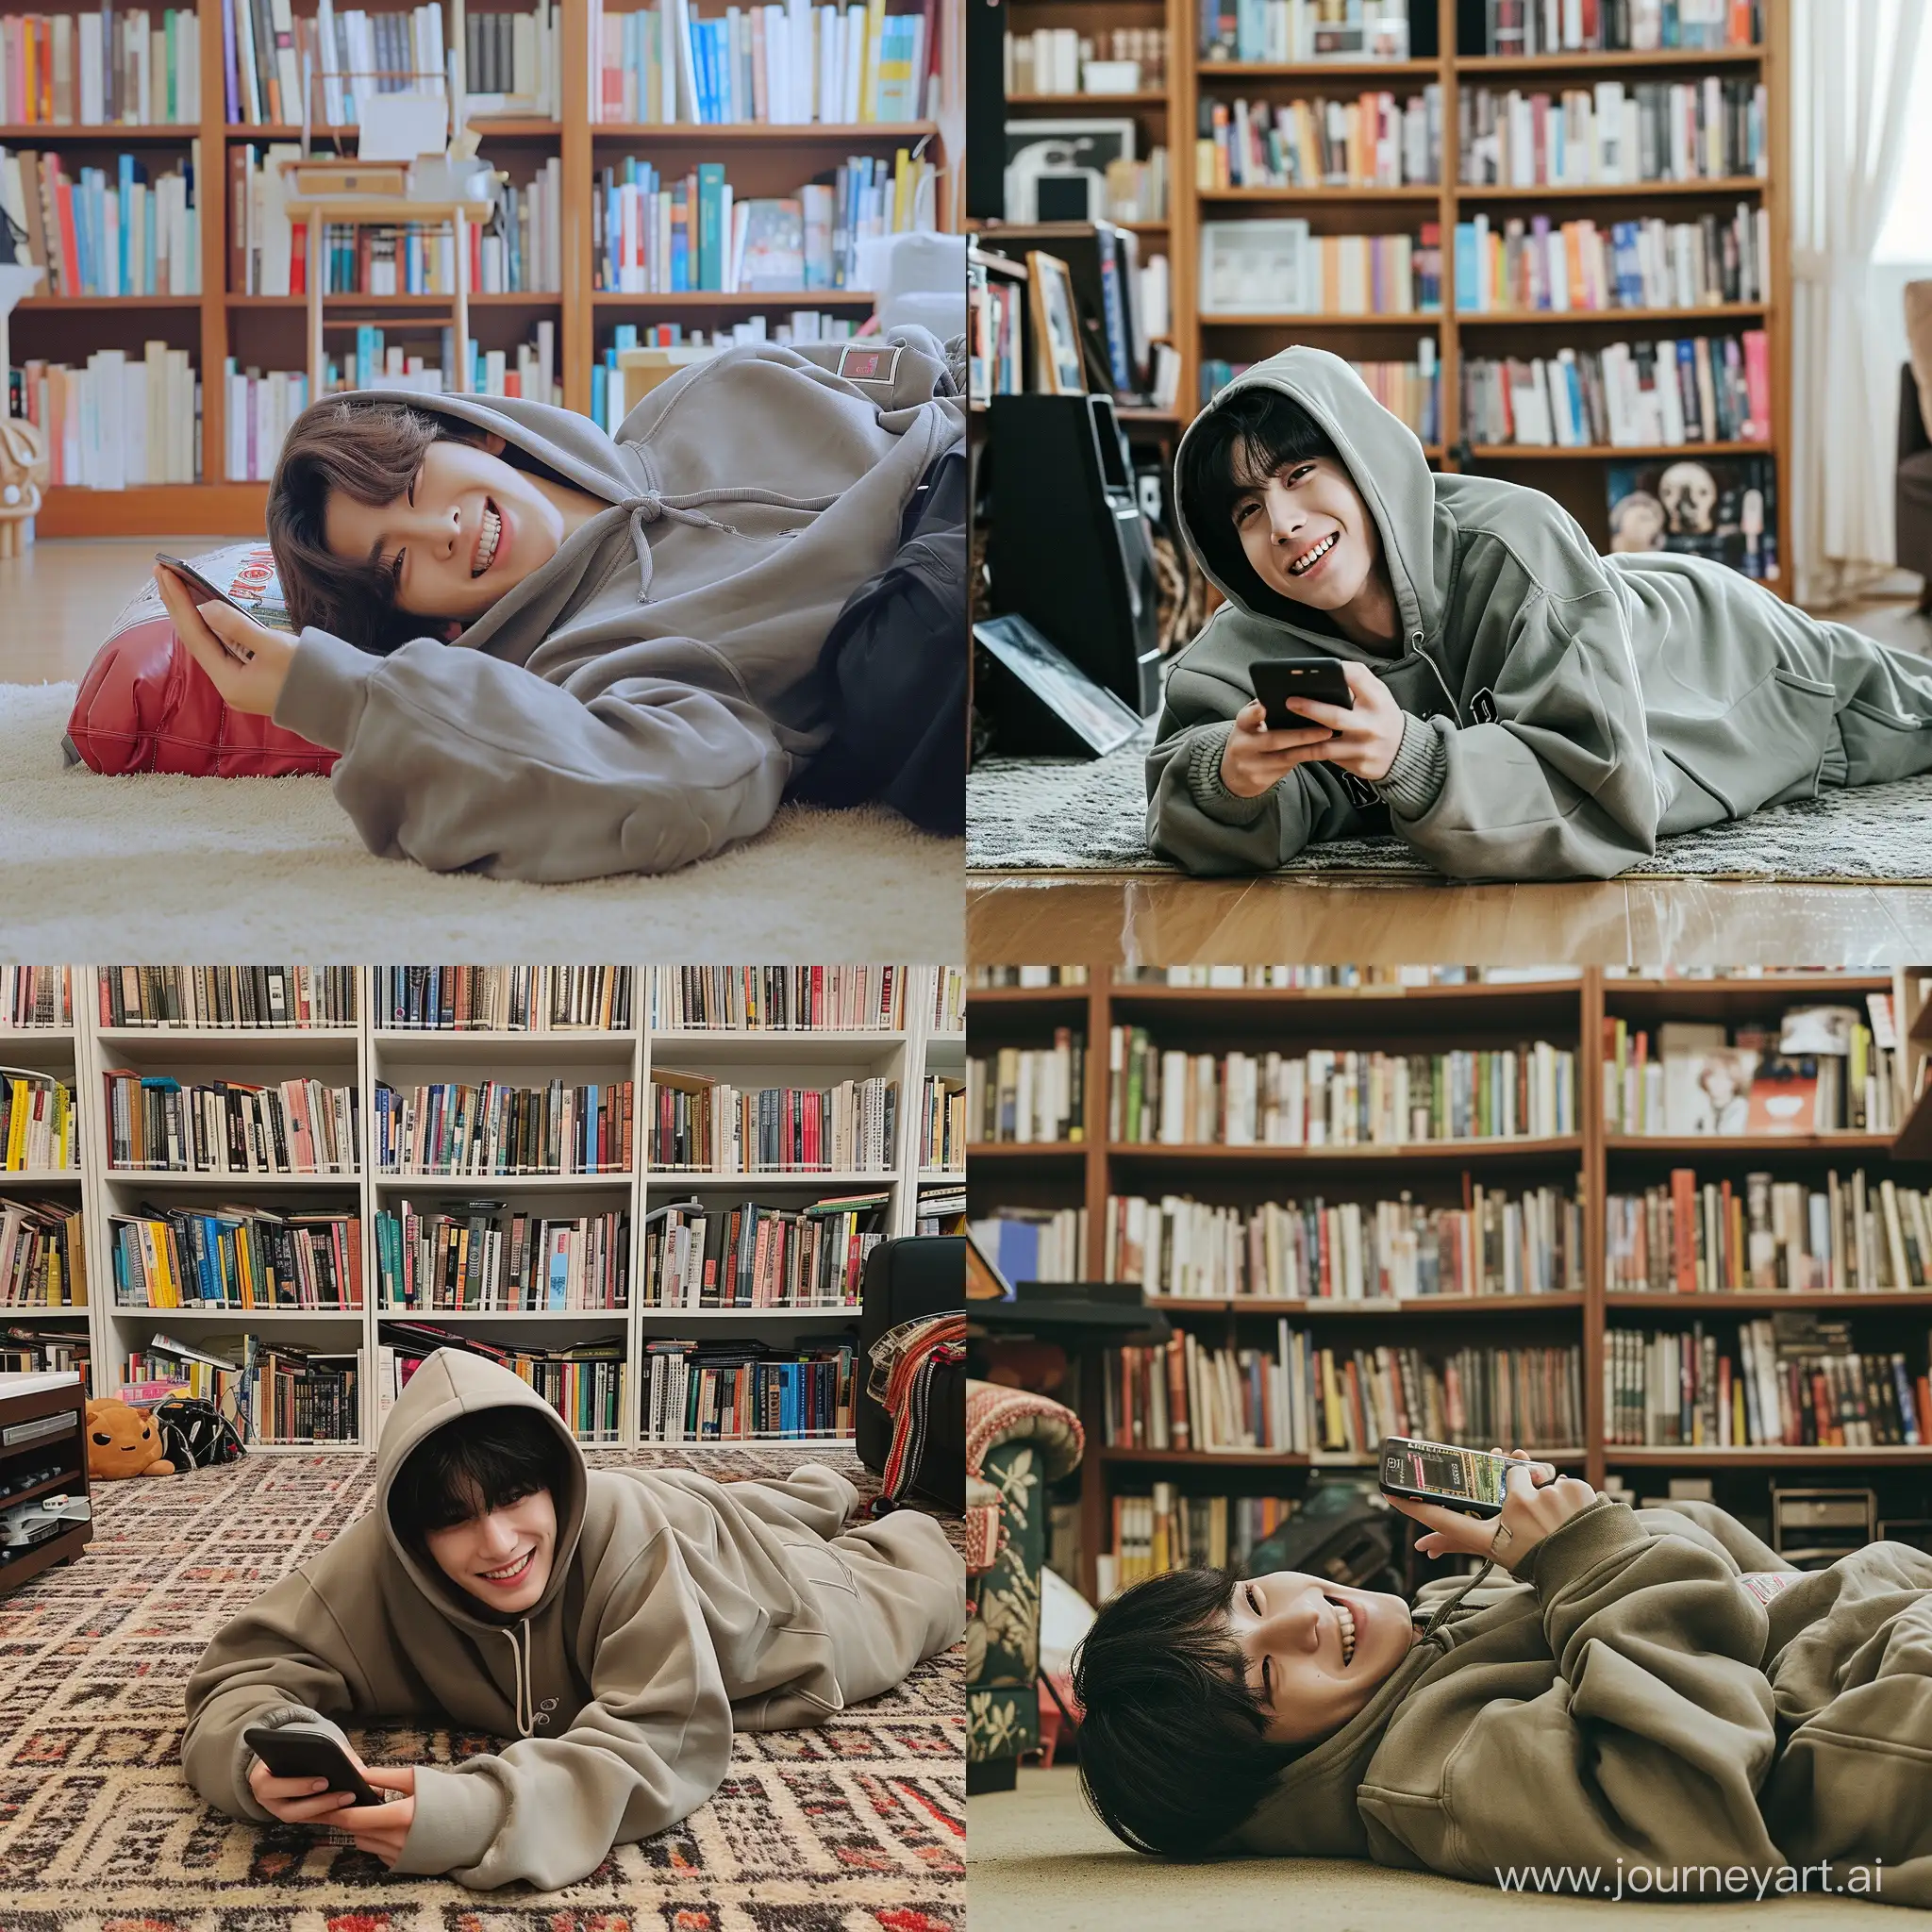 Smiling-Minho-from-Stray-Kids-Enjoying-a-Fancooled-Moment-in-Cozy-Hoodie